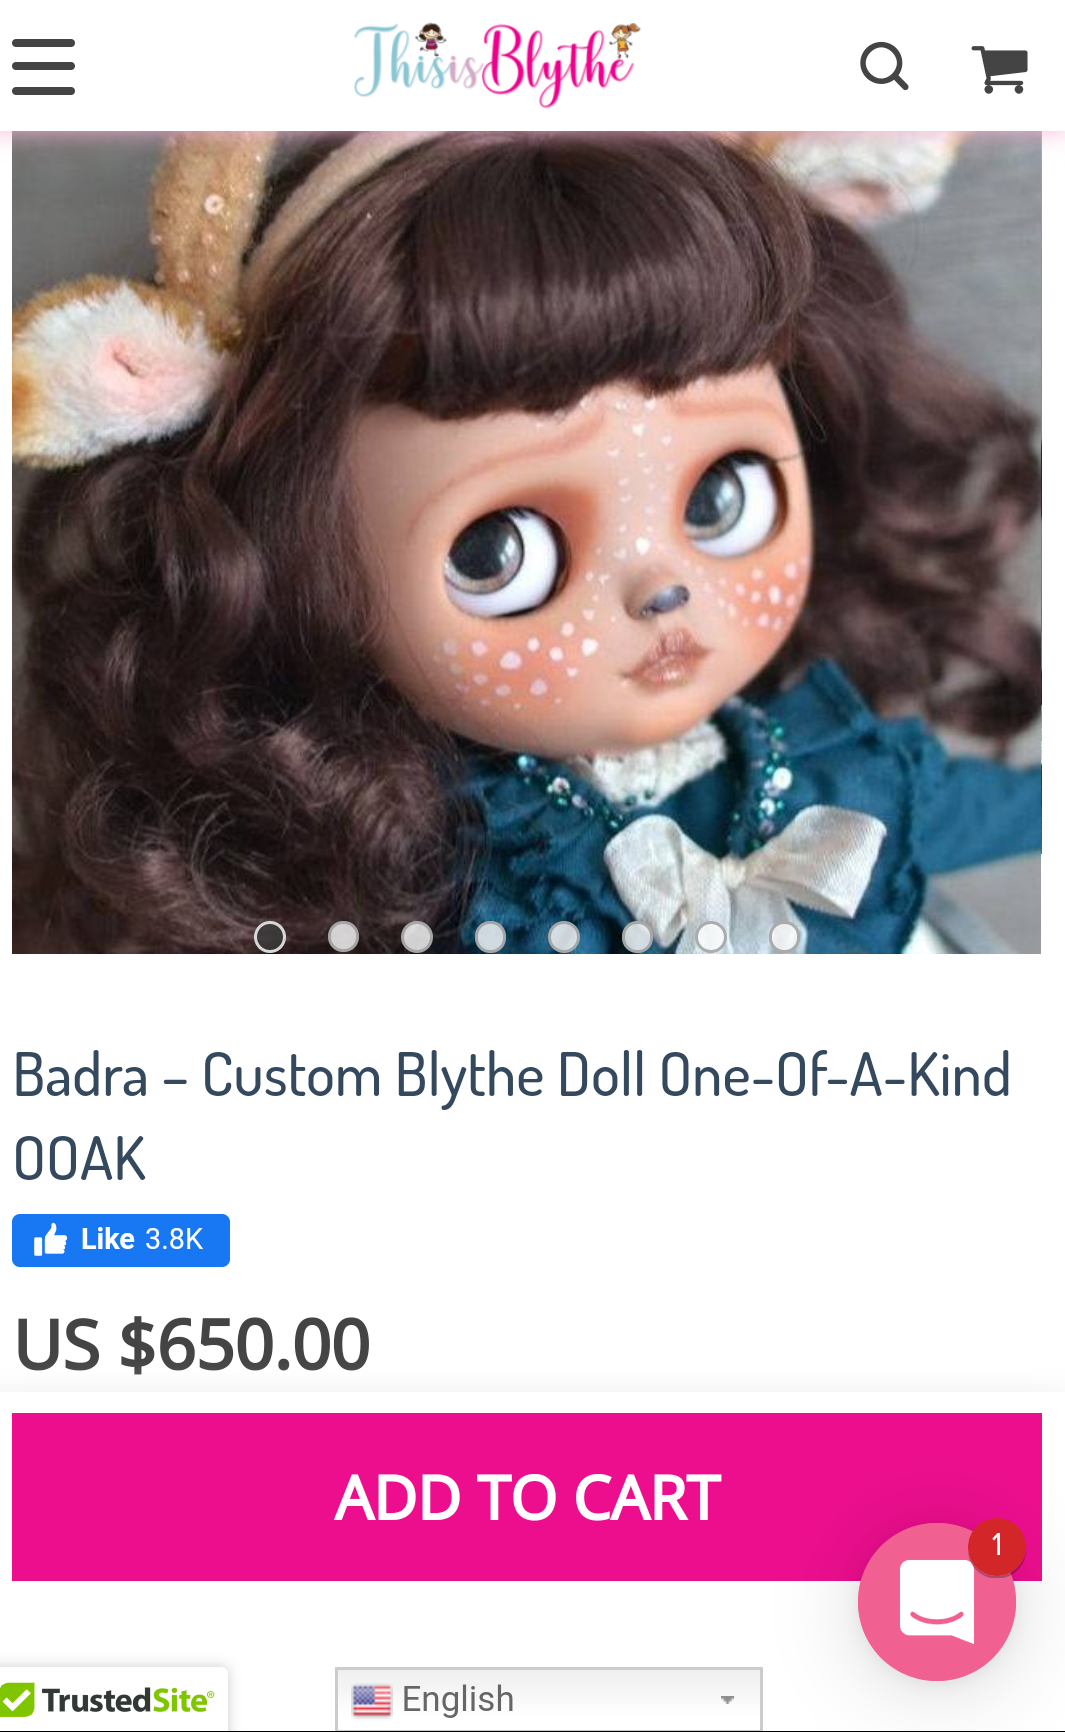 The same Lolipopbears doll image stolen and used on ThisIsBlythe